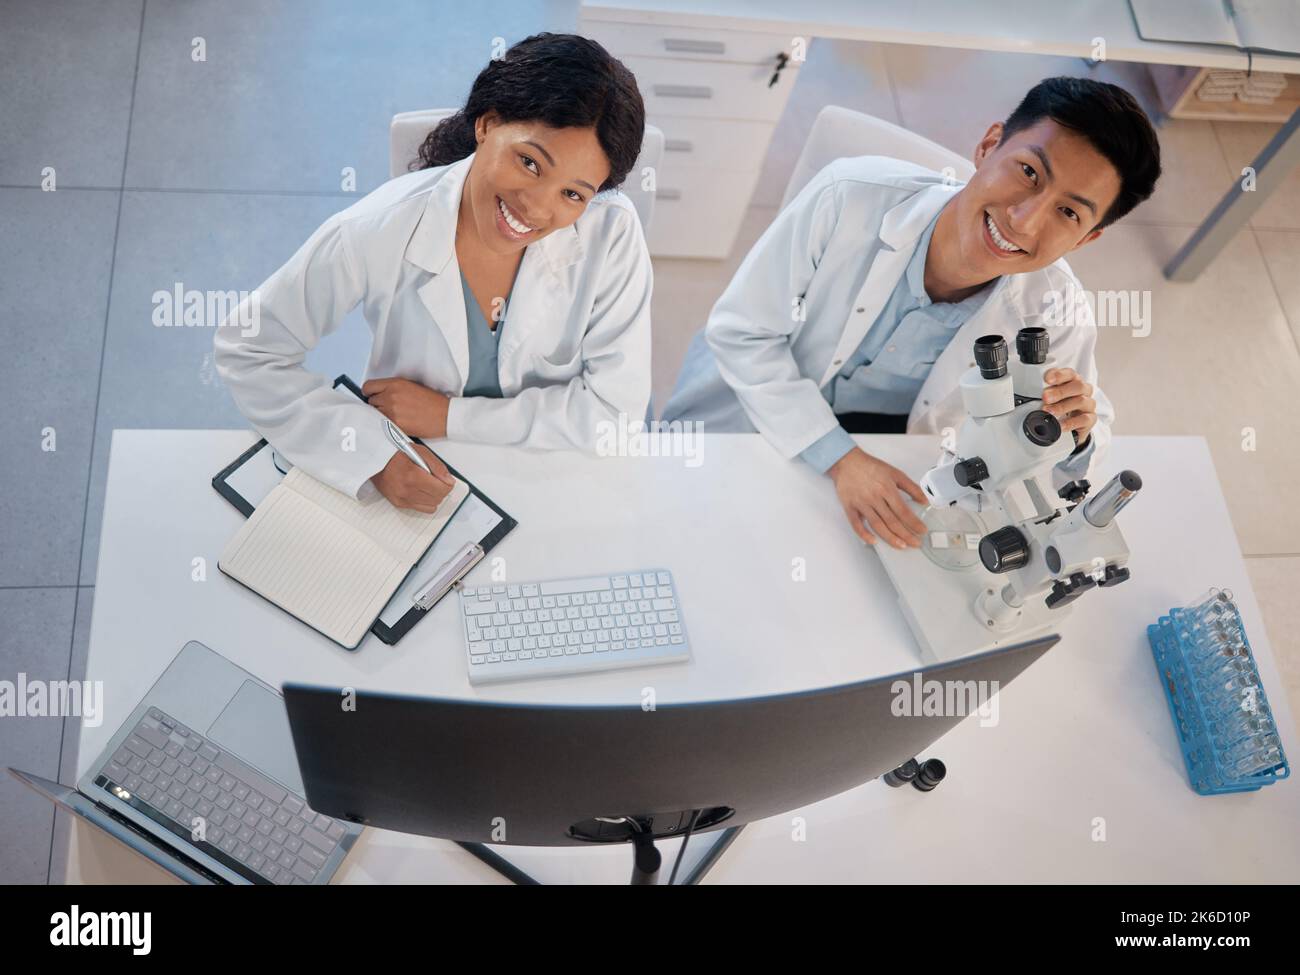 Working to make each other better. two lab workers together in their office. Stock Photo